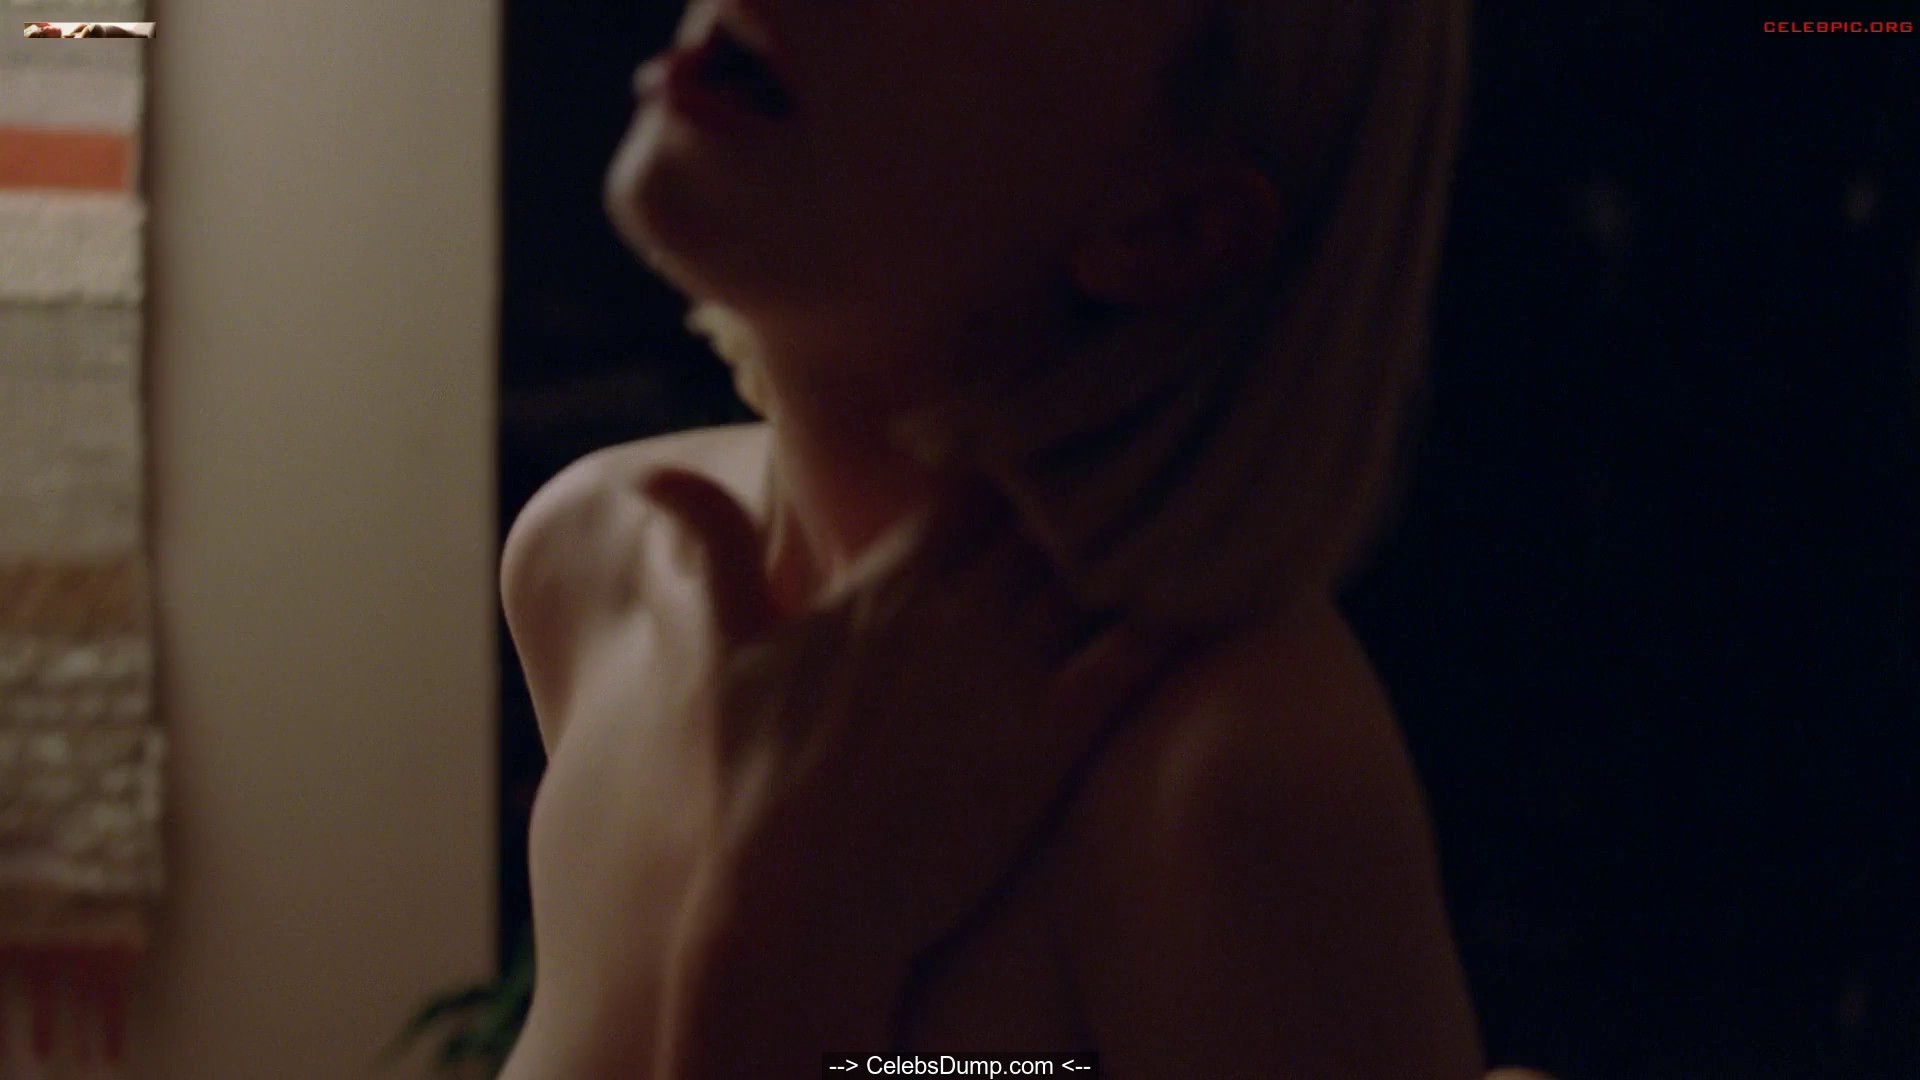 Madeline Wise nude in sex scenes from Crashing S03 E03 (2019) .